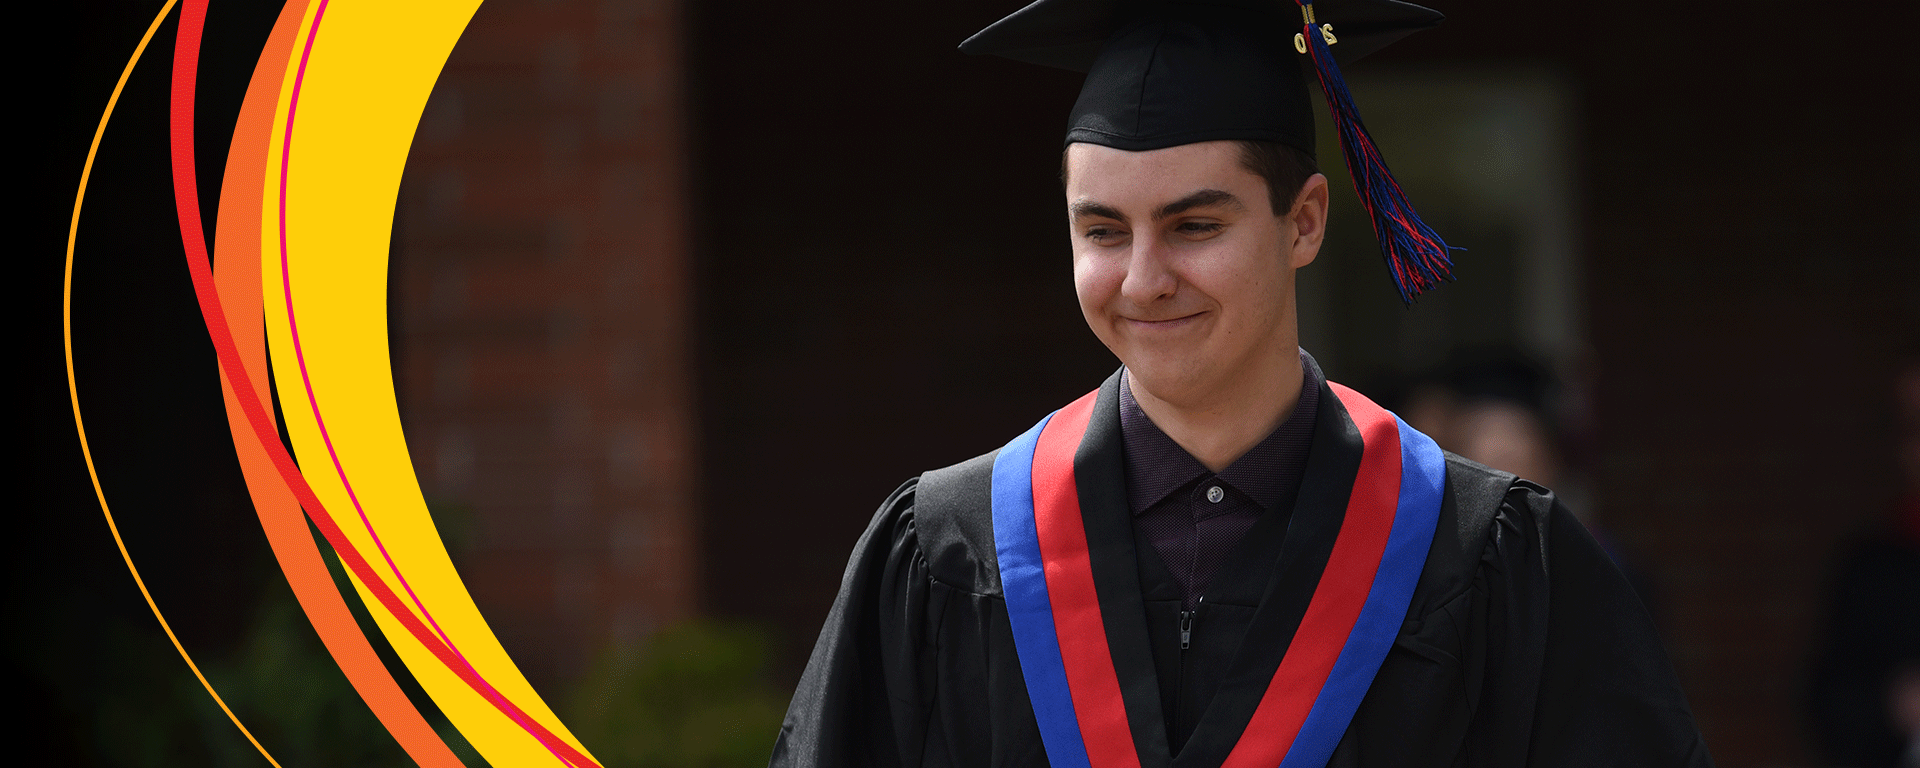 Young man at graduation, wearing a cap and gown